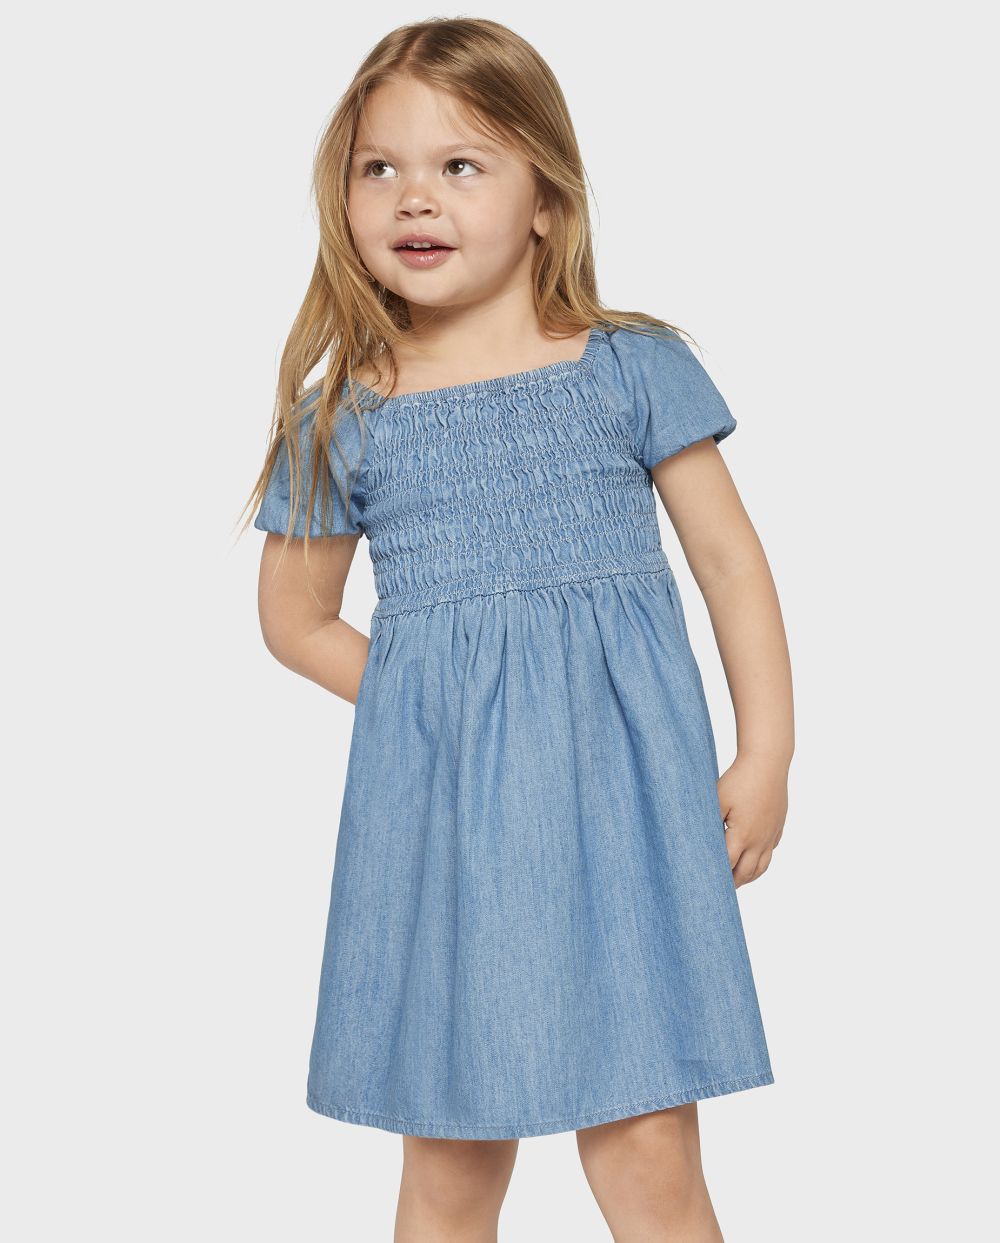 Toddler Smocked Square Neck Above the Knee Puff Sleeves Short Sleeves Sleeves Dress